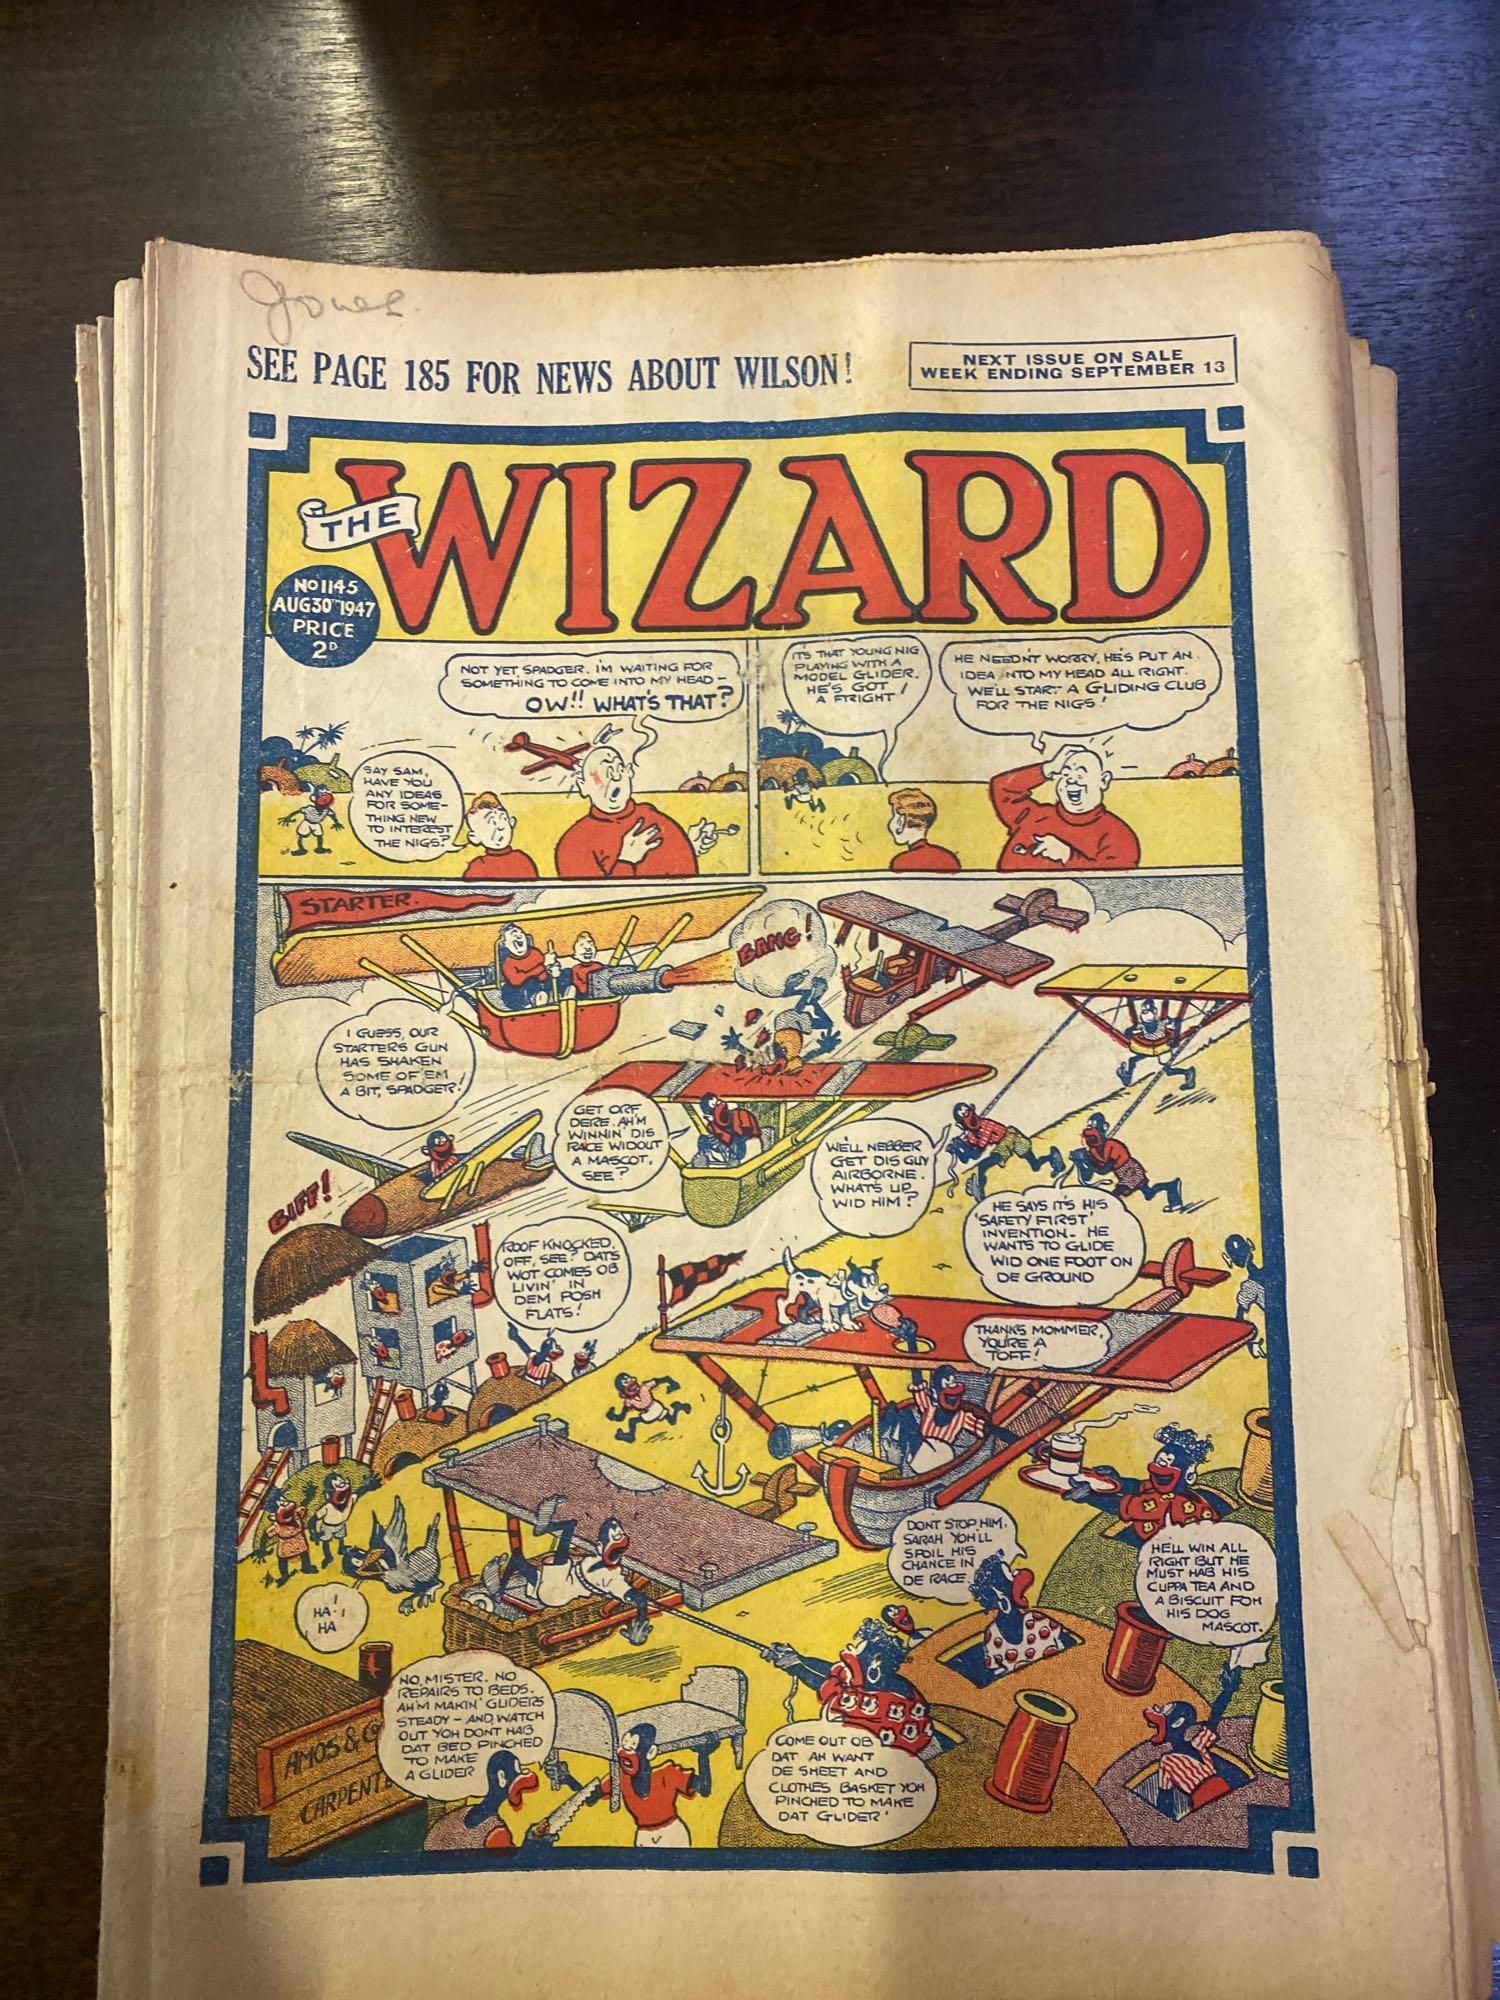 A quantity of vintage comics and childrens newspapers - Image 18 of 124